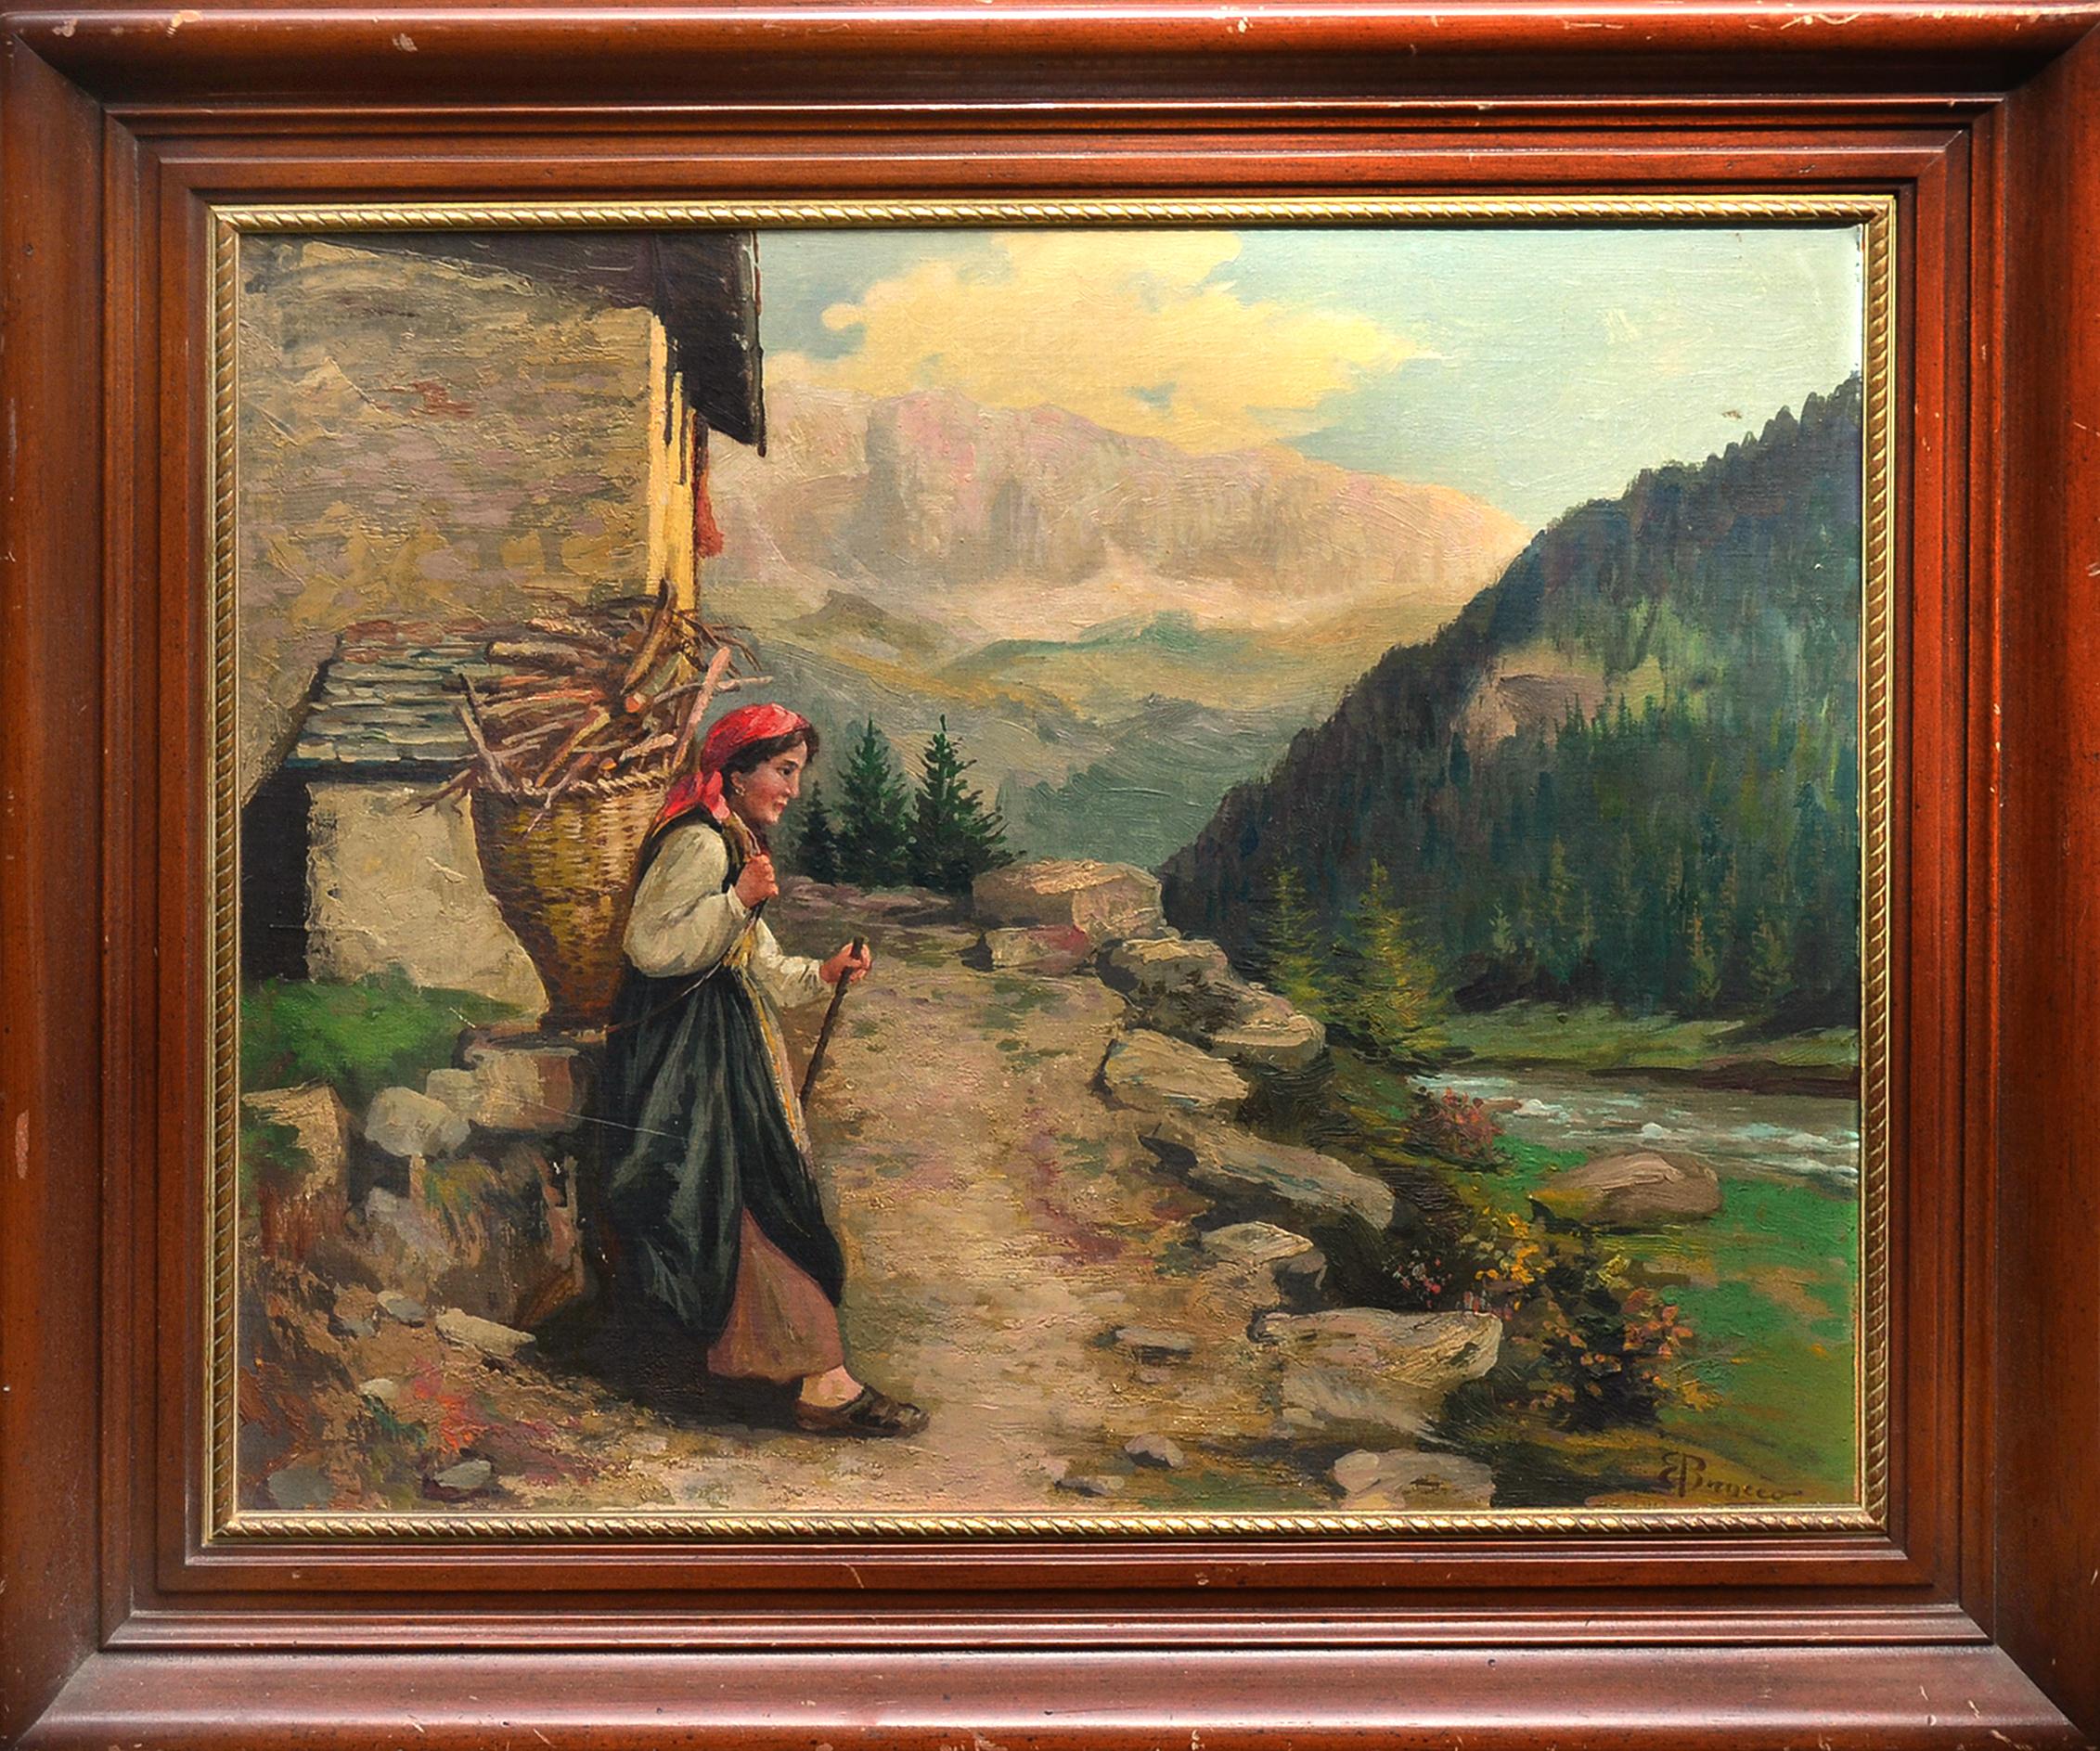 Enrique Brocco Landscape Painting - Woman Carrying Wood, Early 20th Century Figurative Landscape